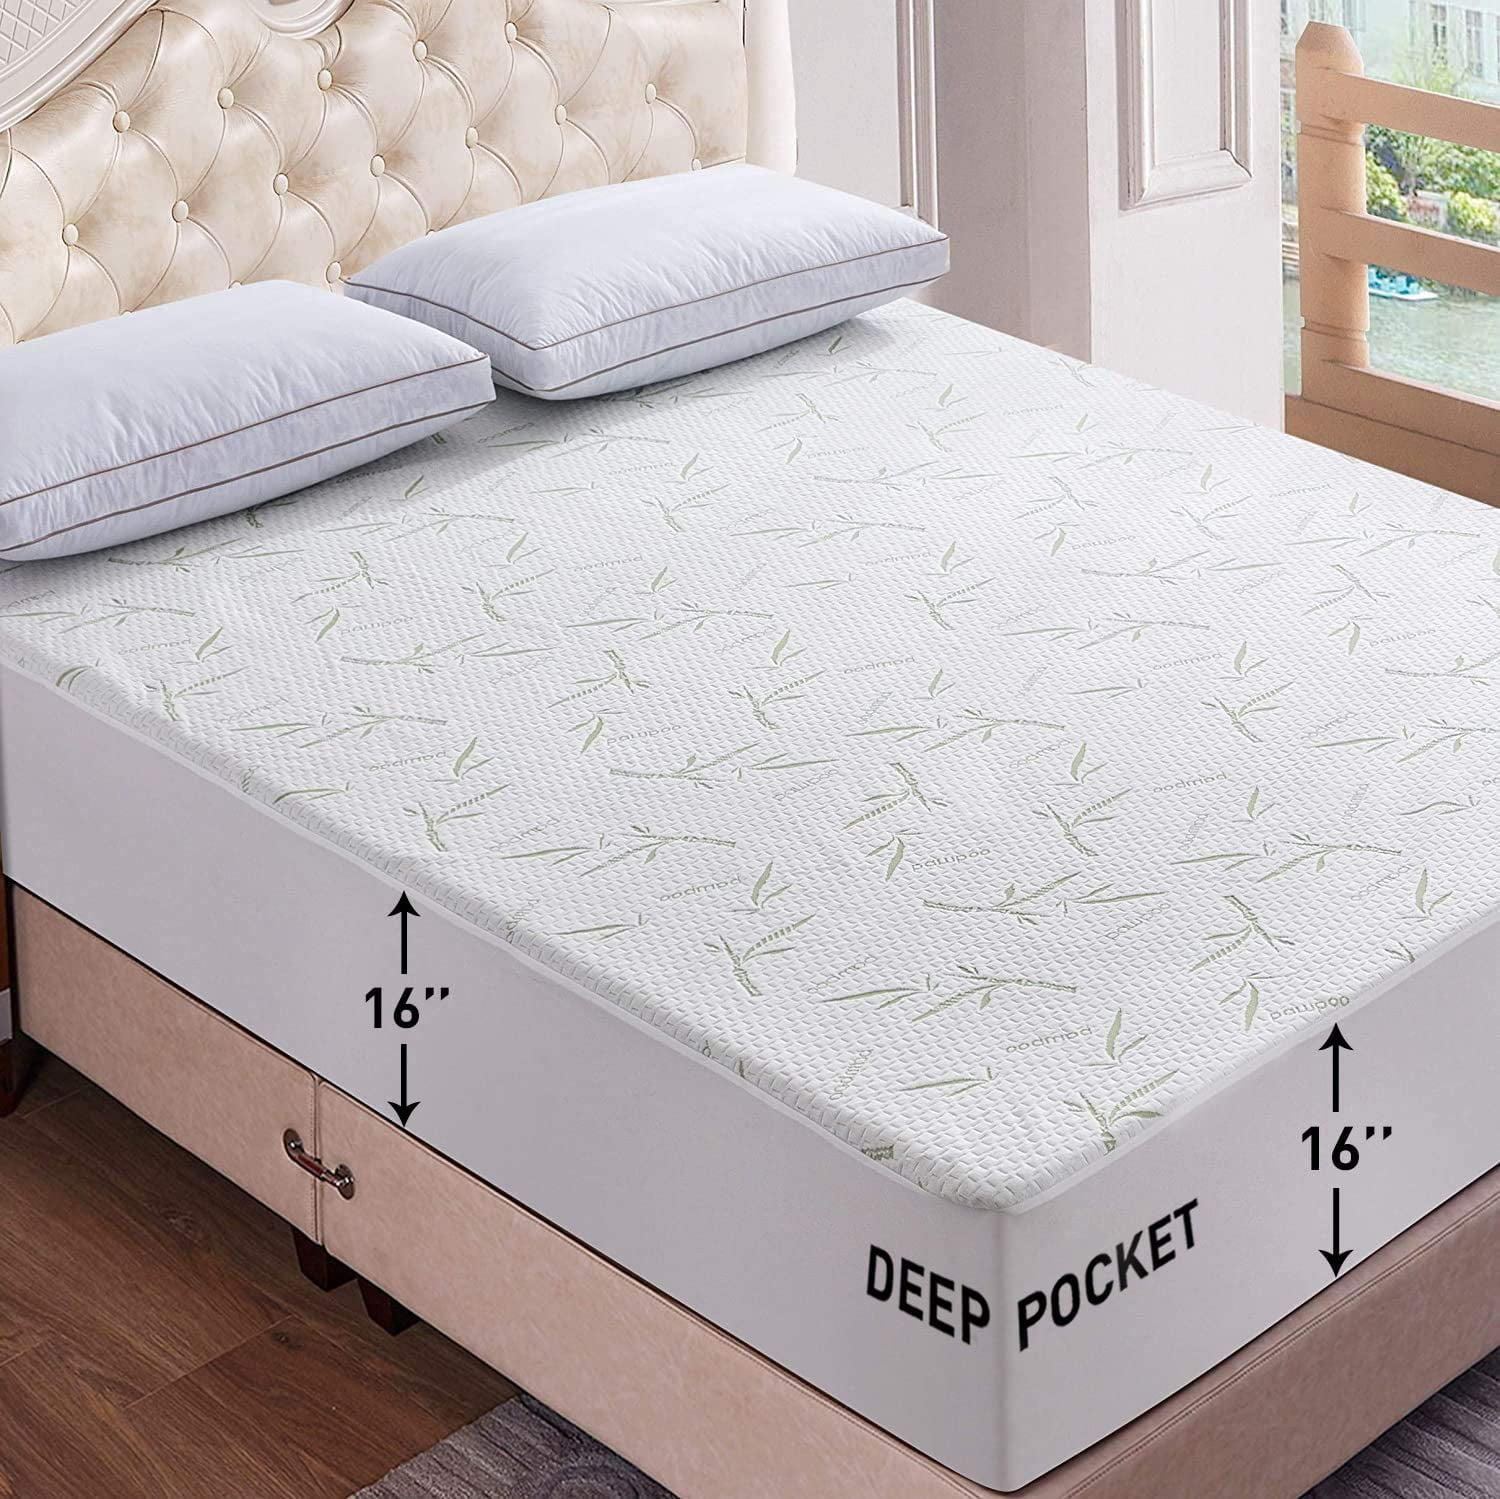 King Size Waterproof Mattress Pad Protector Bed Topper Cover Hypoallergenic Soft 